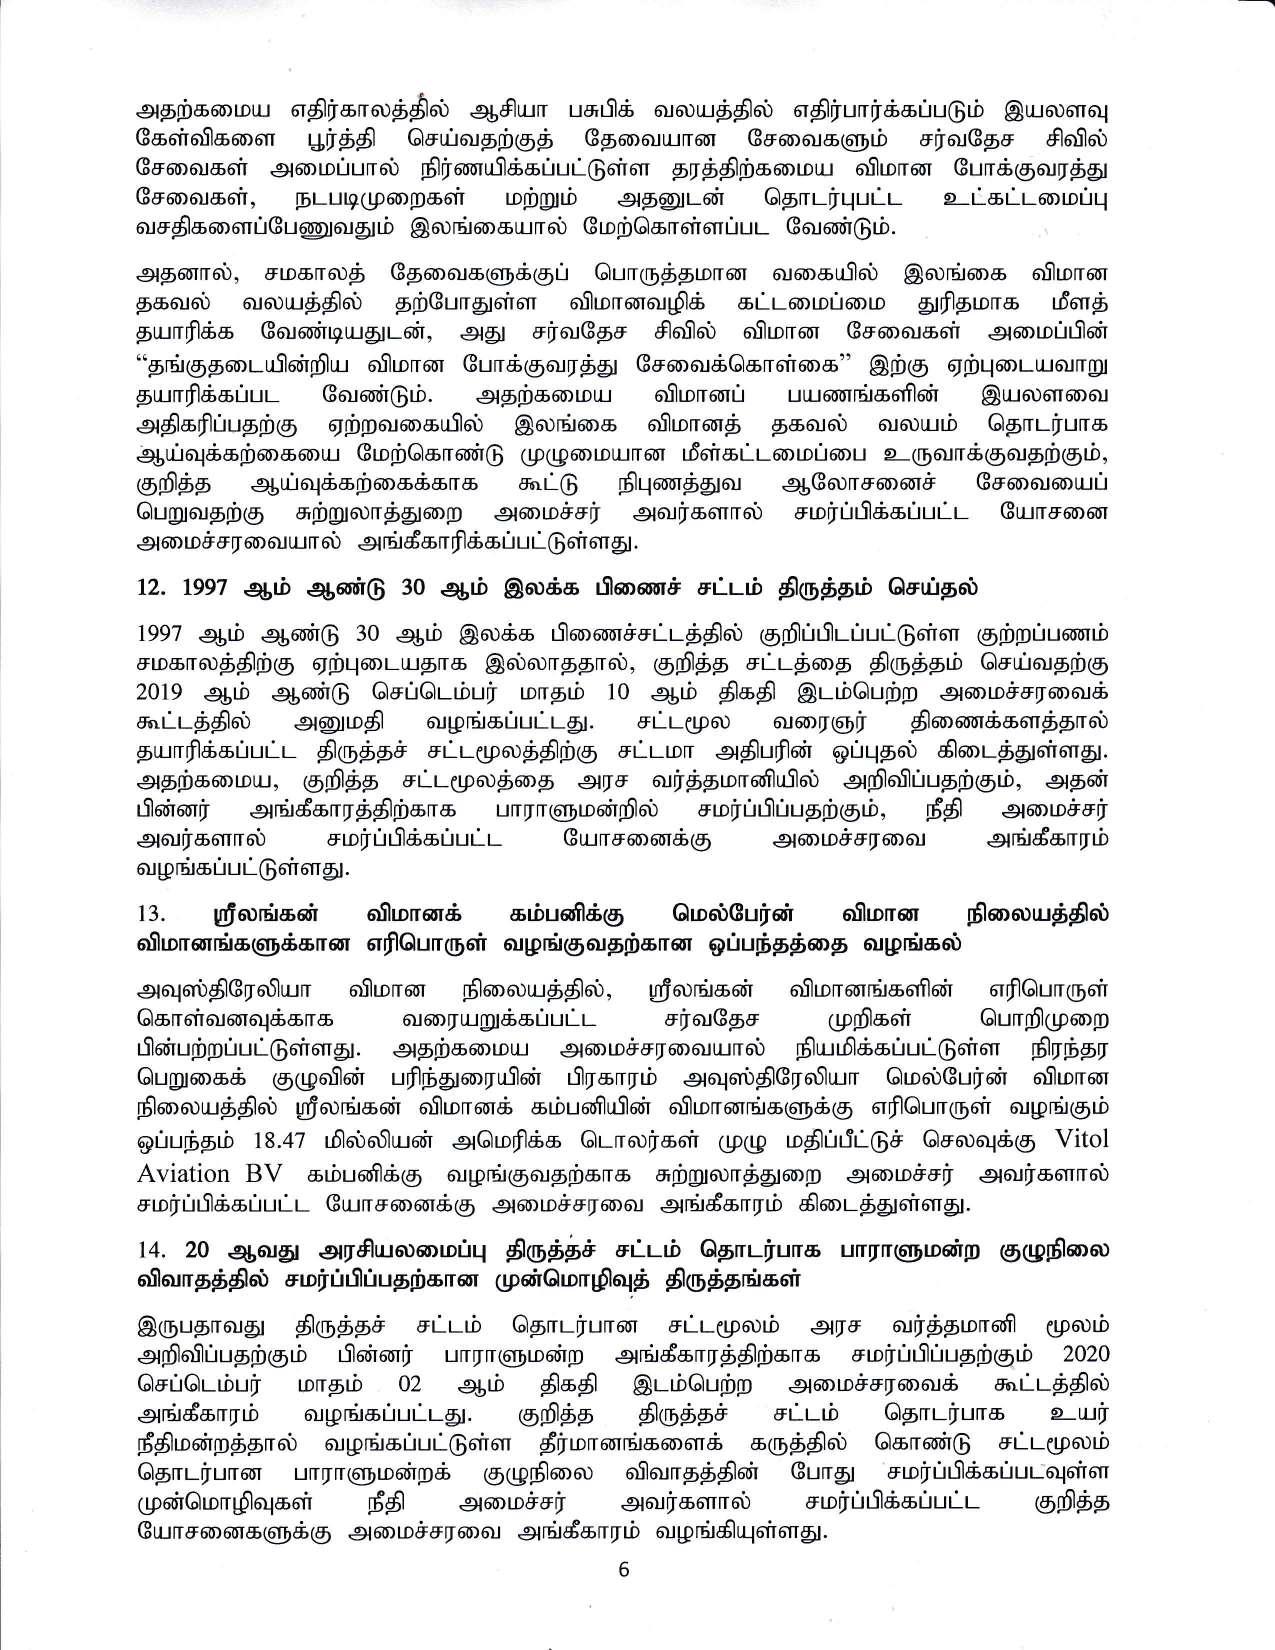 Cabinet Decision on 19.10.2020 Tamil compressed page 006